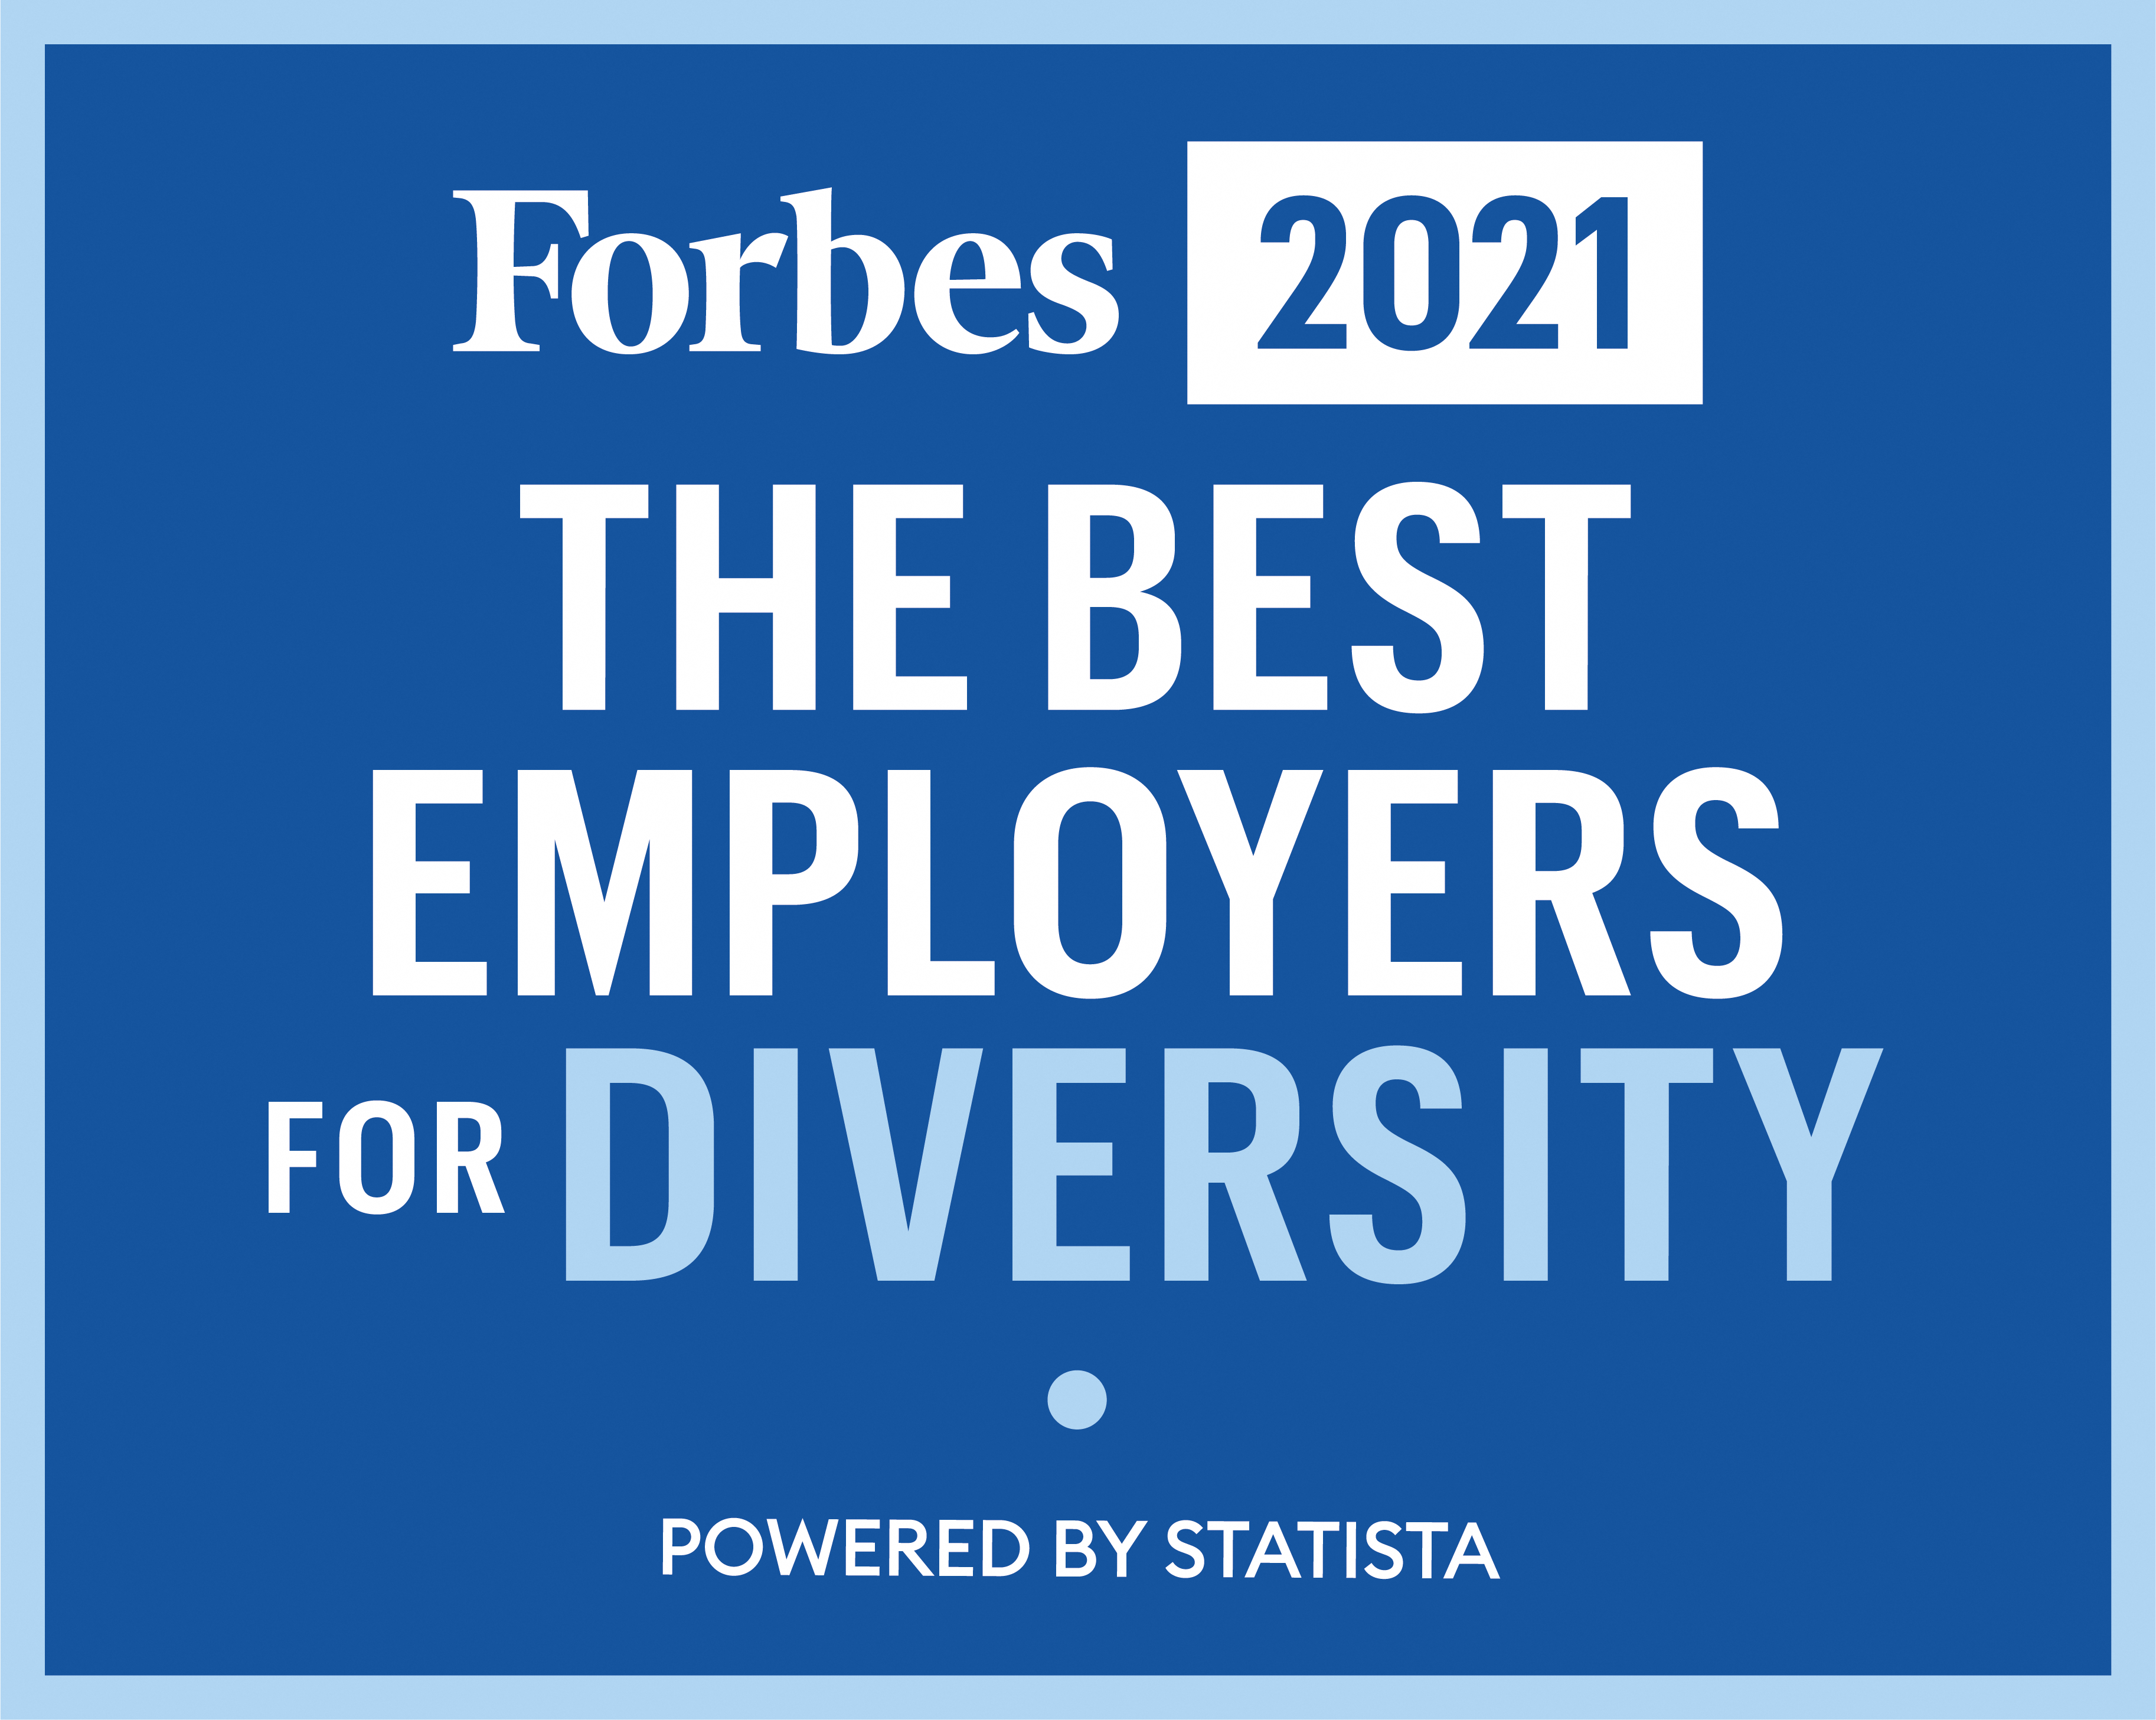 Forbes 2021 Best Employers for Diversity Text Logo